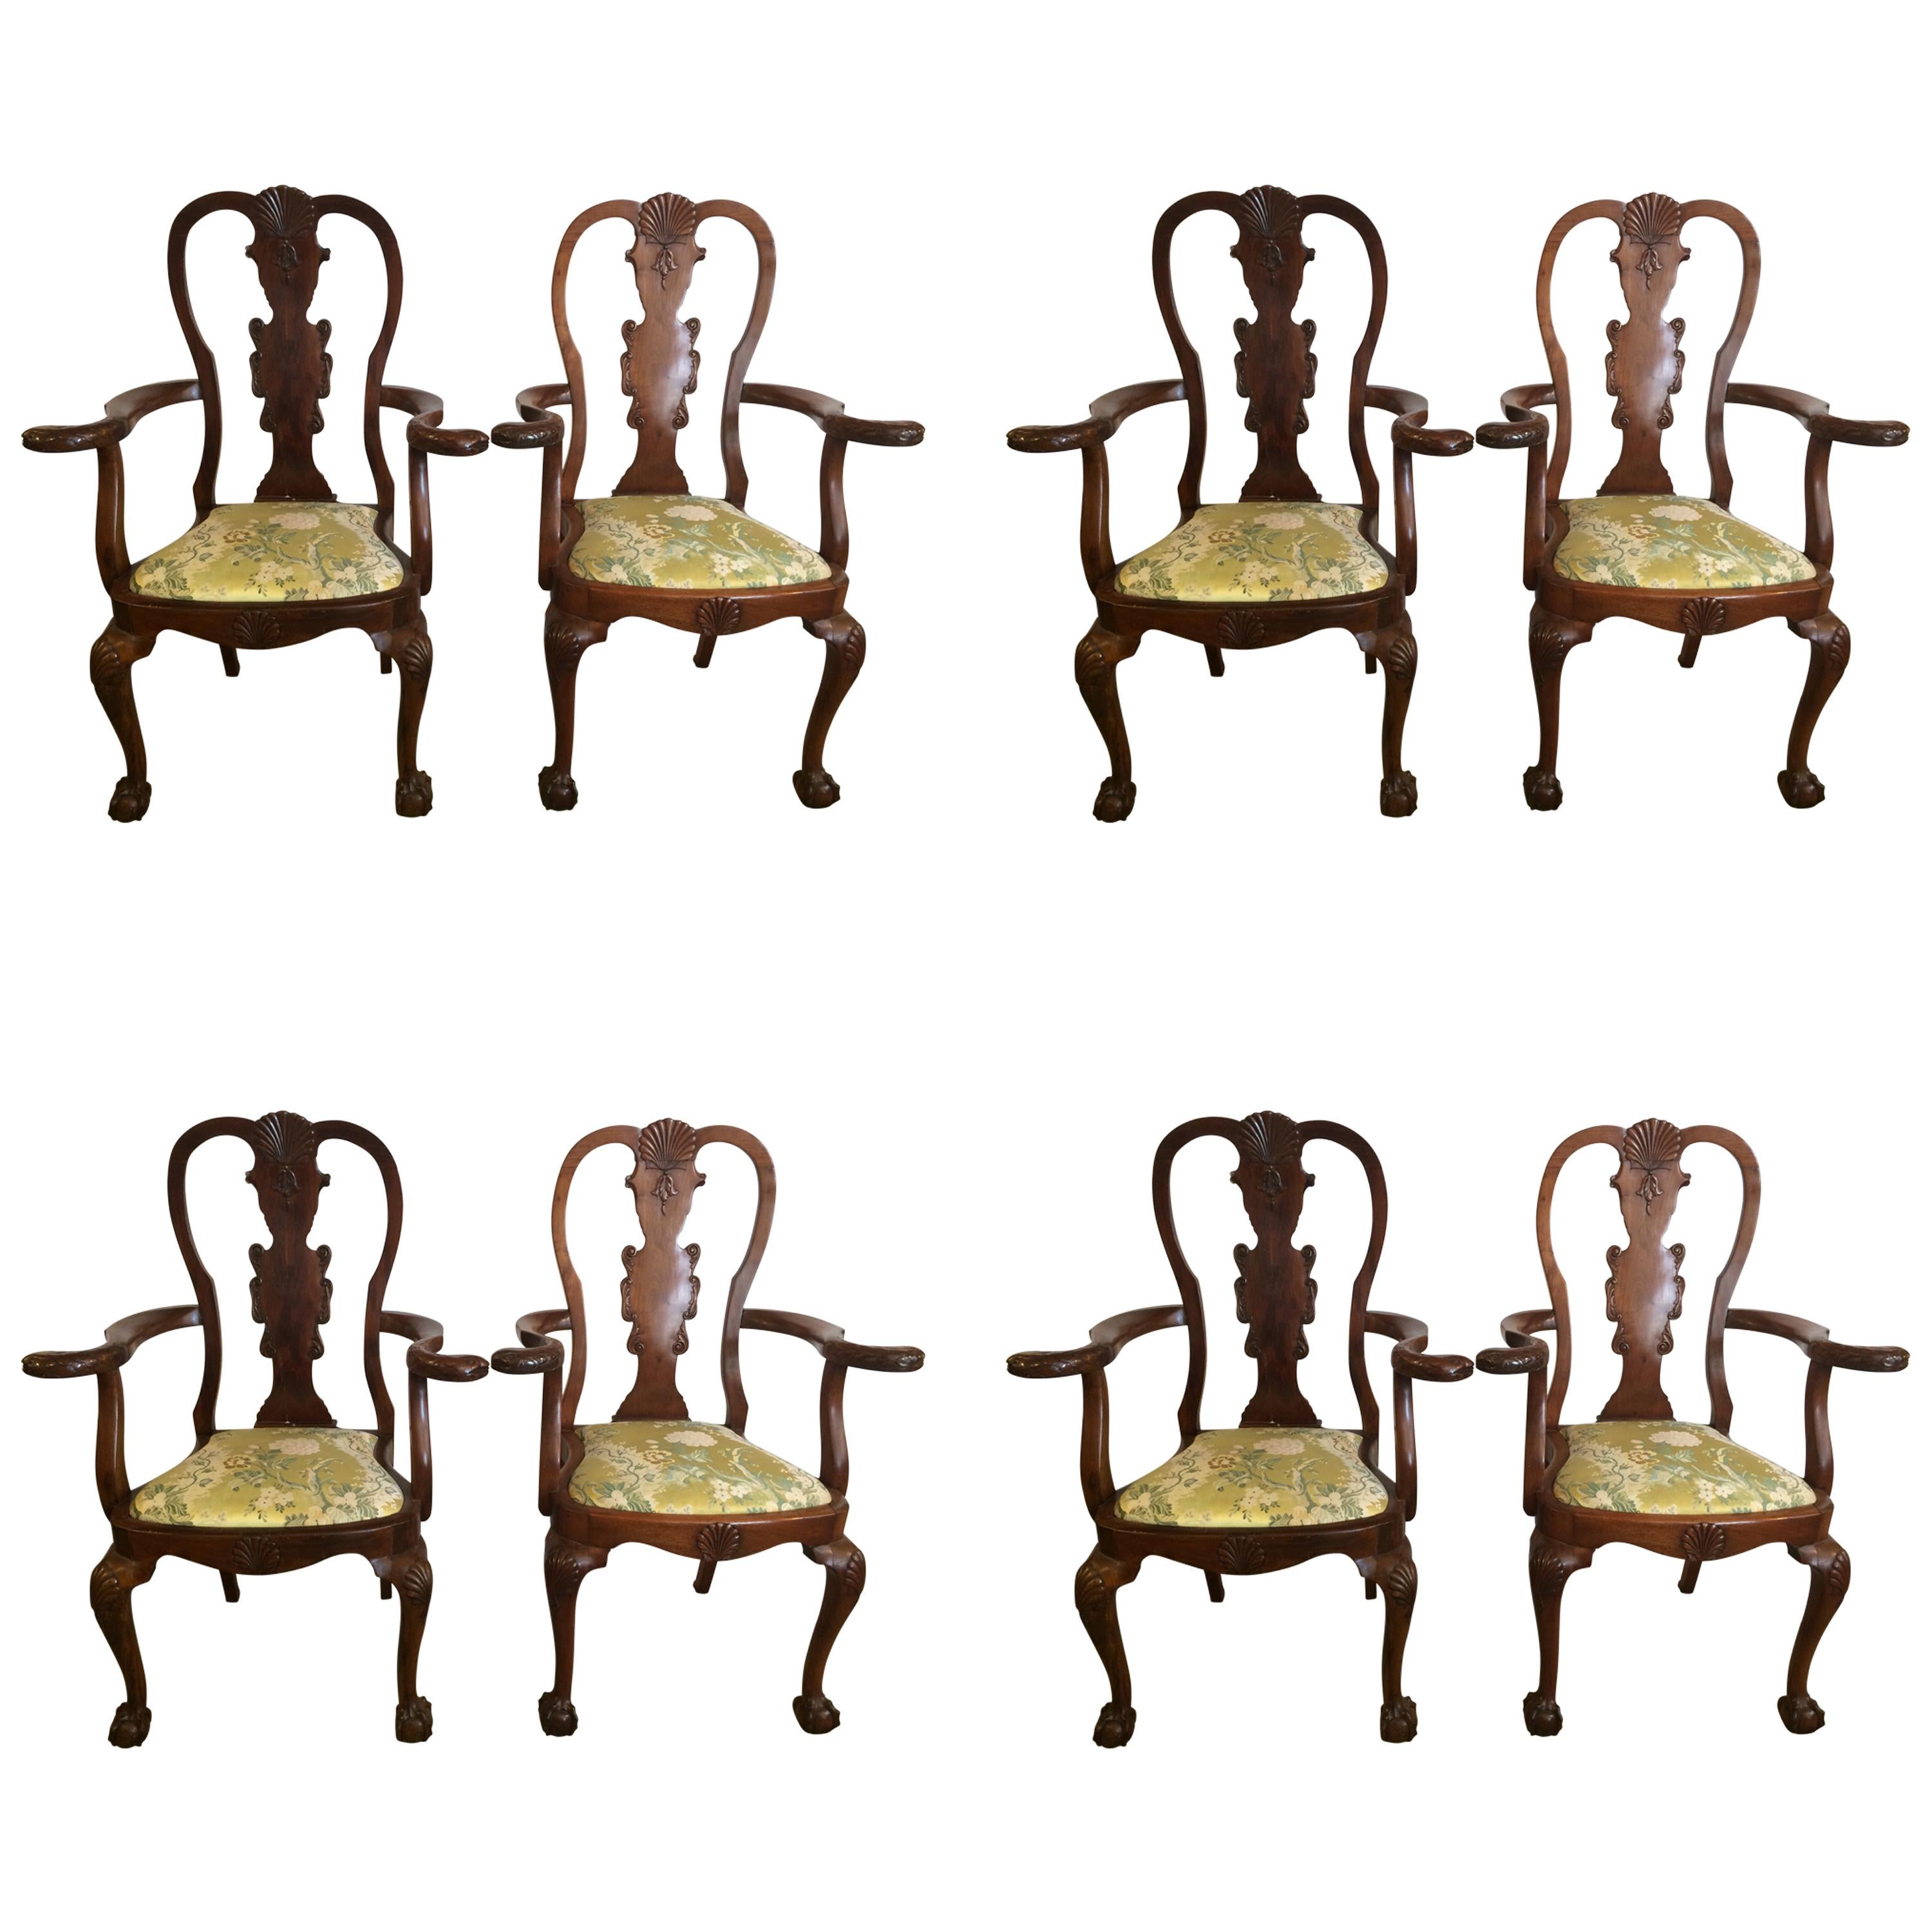 A wonderful antique set of mahogany Queen Anne style dining chairs with charm and character having two arm chairs and six side chairs. The arm chairs have curved arms with serpents as handle, all have shell motif decoration and ball and claw